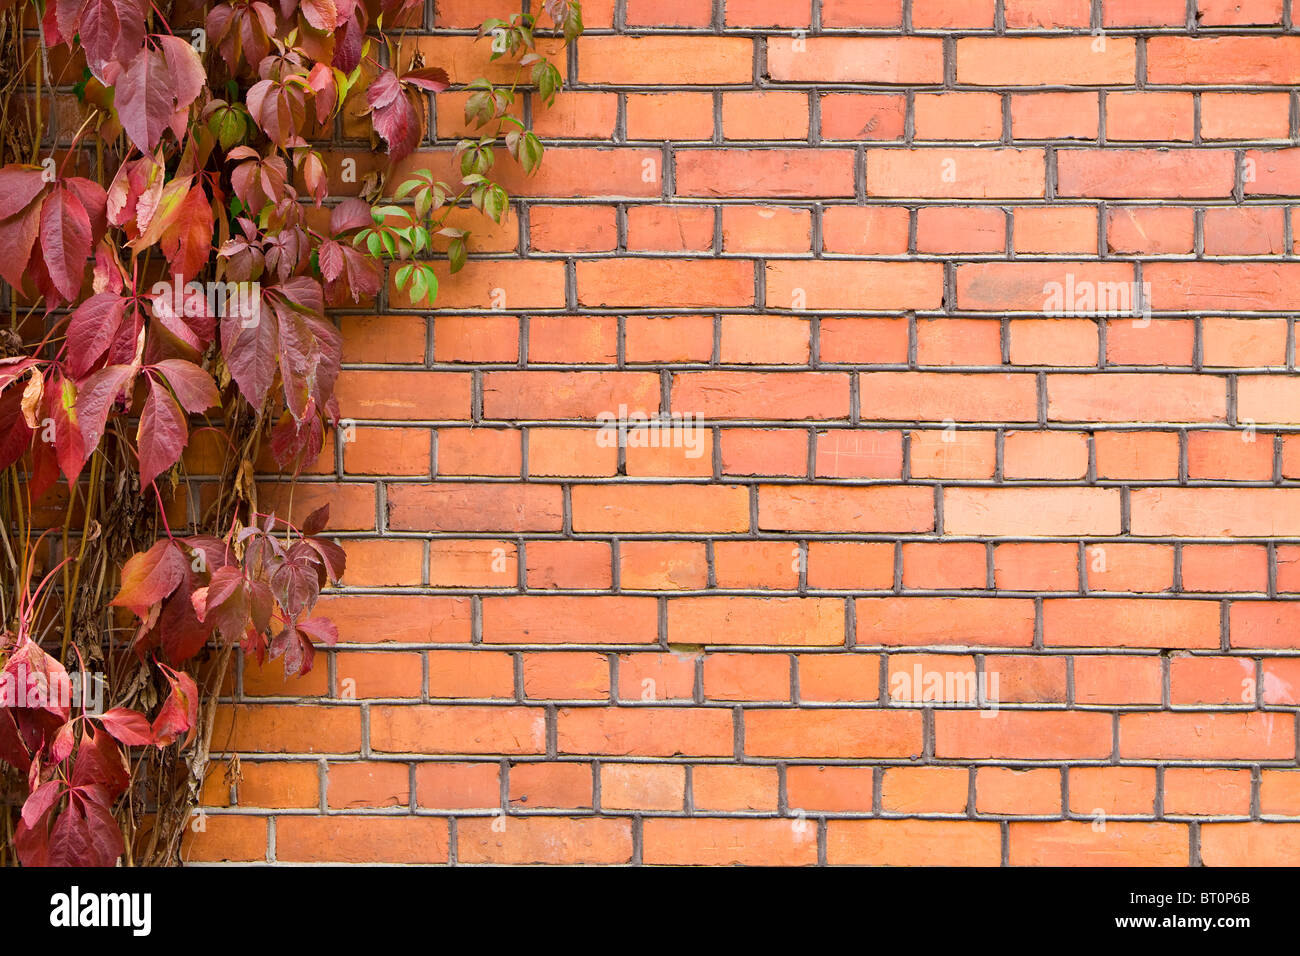 wall with vine. brick wall covered in ivy. Stock Photo